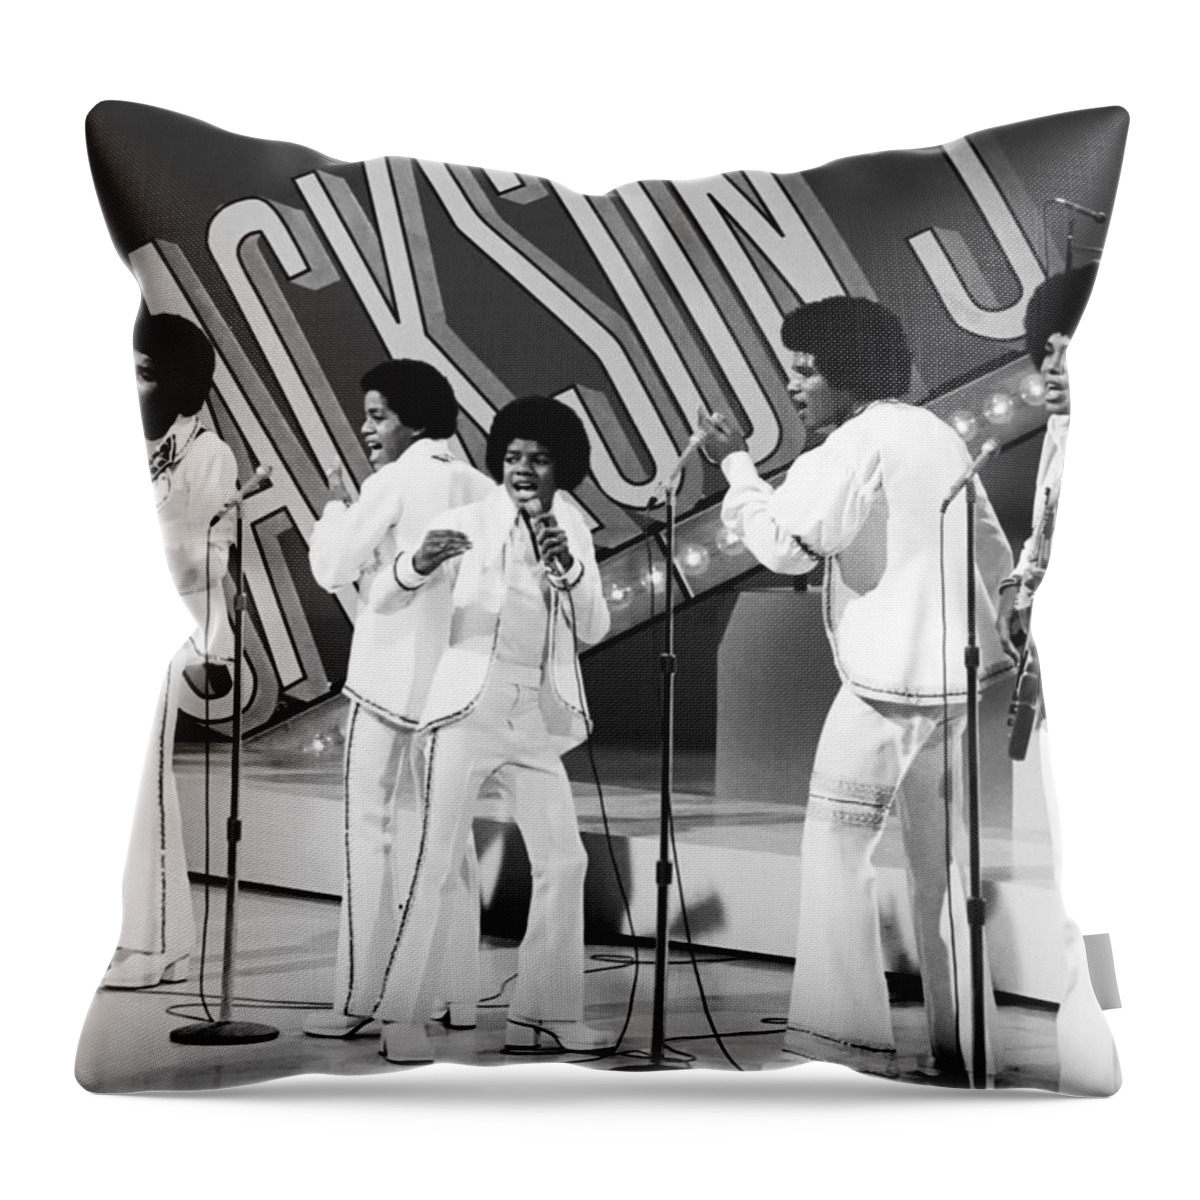 Publicity Photo Throw Pillow featuring the photograph The Jackson 5 1972 by Mountain Dreams